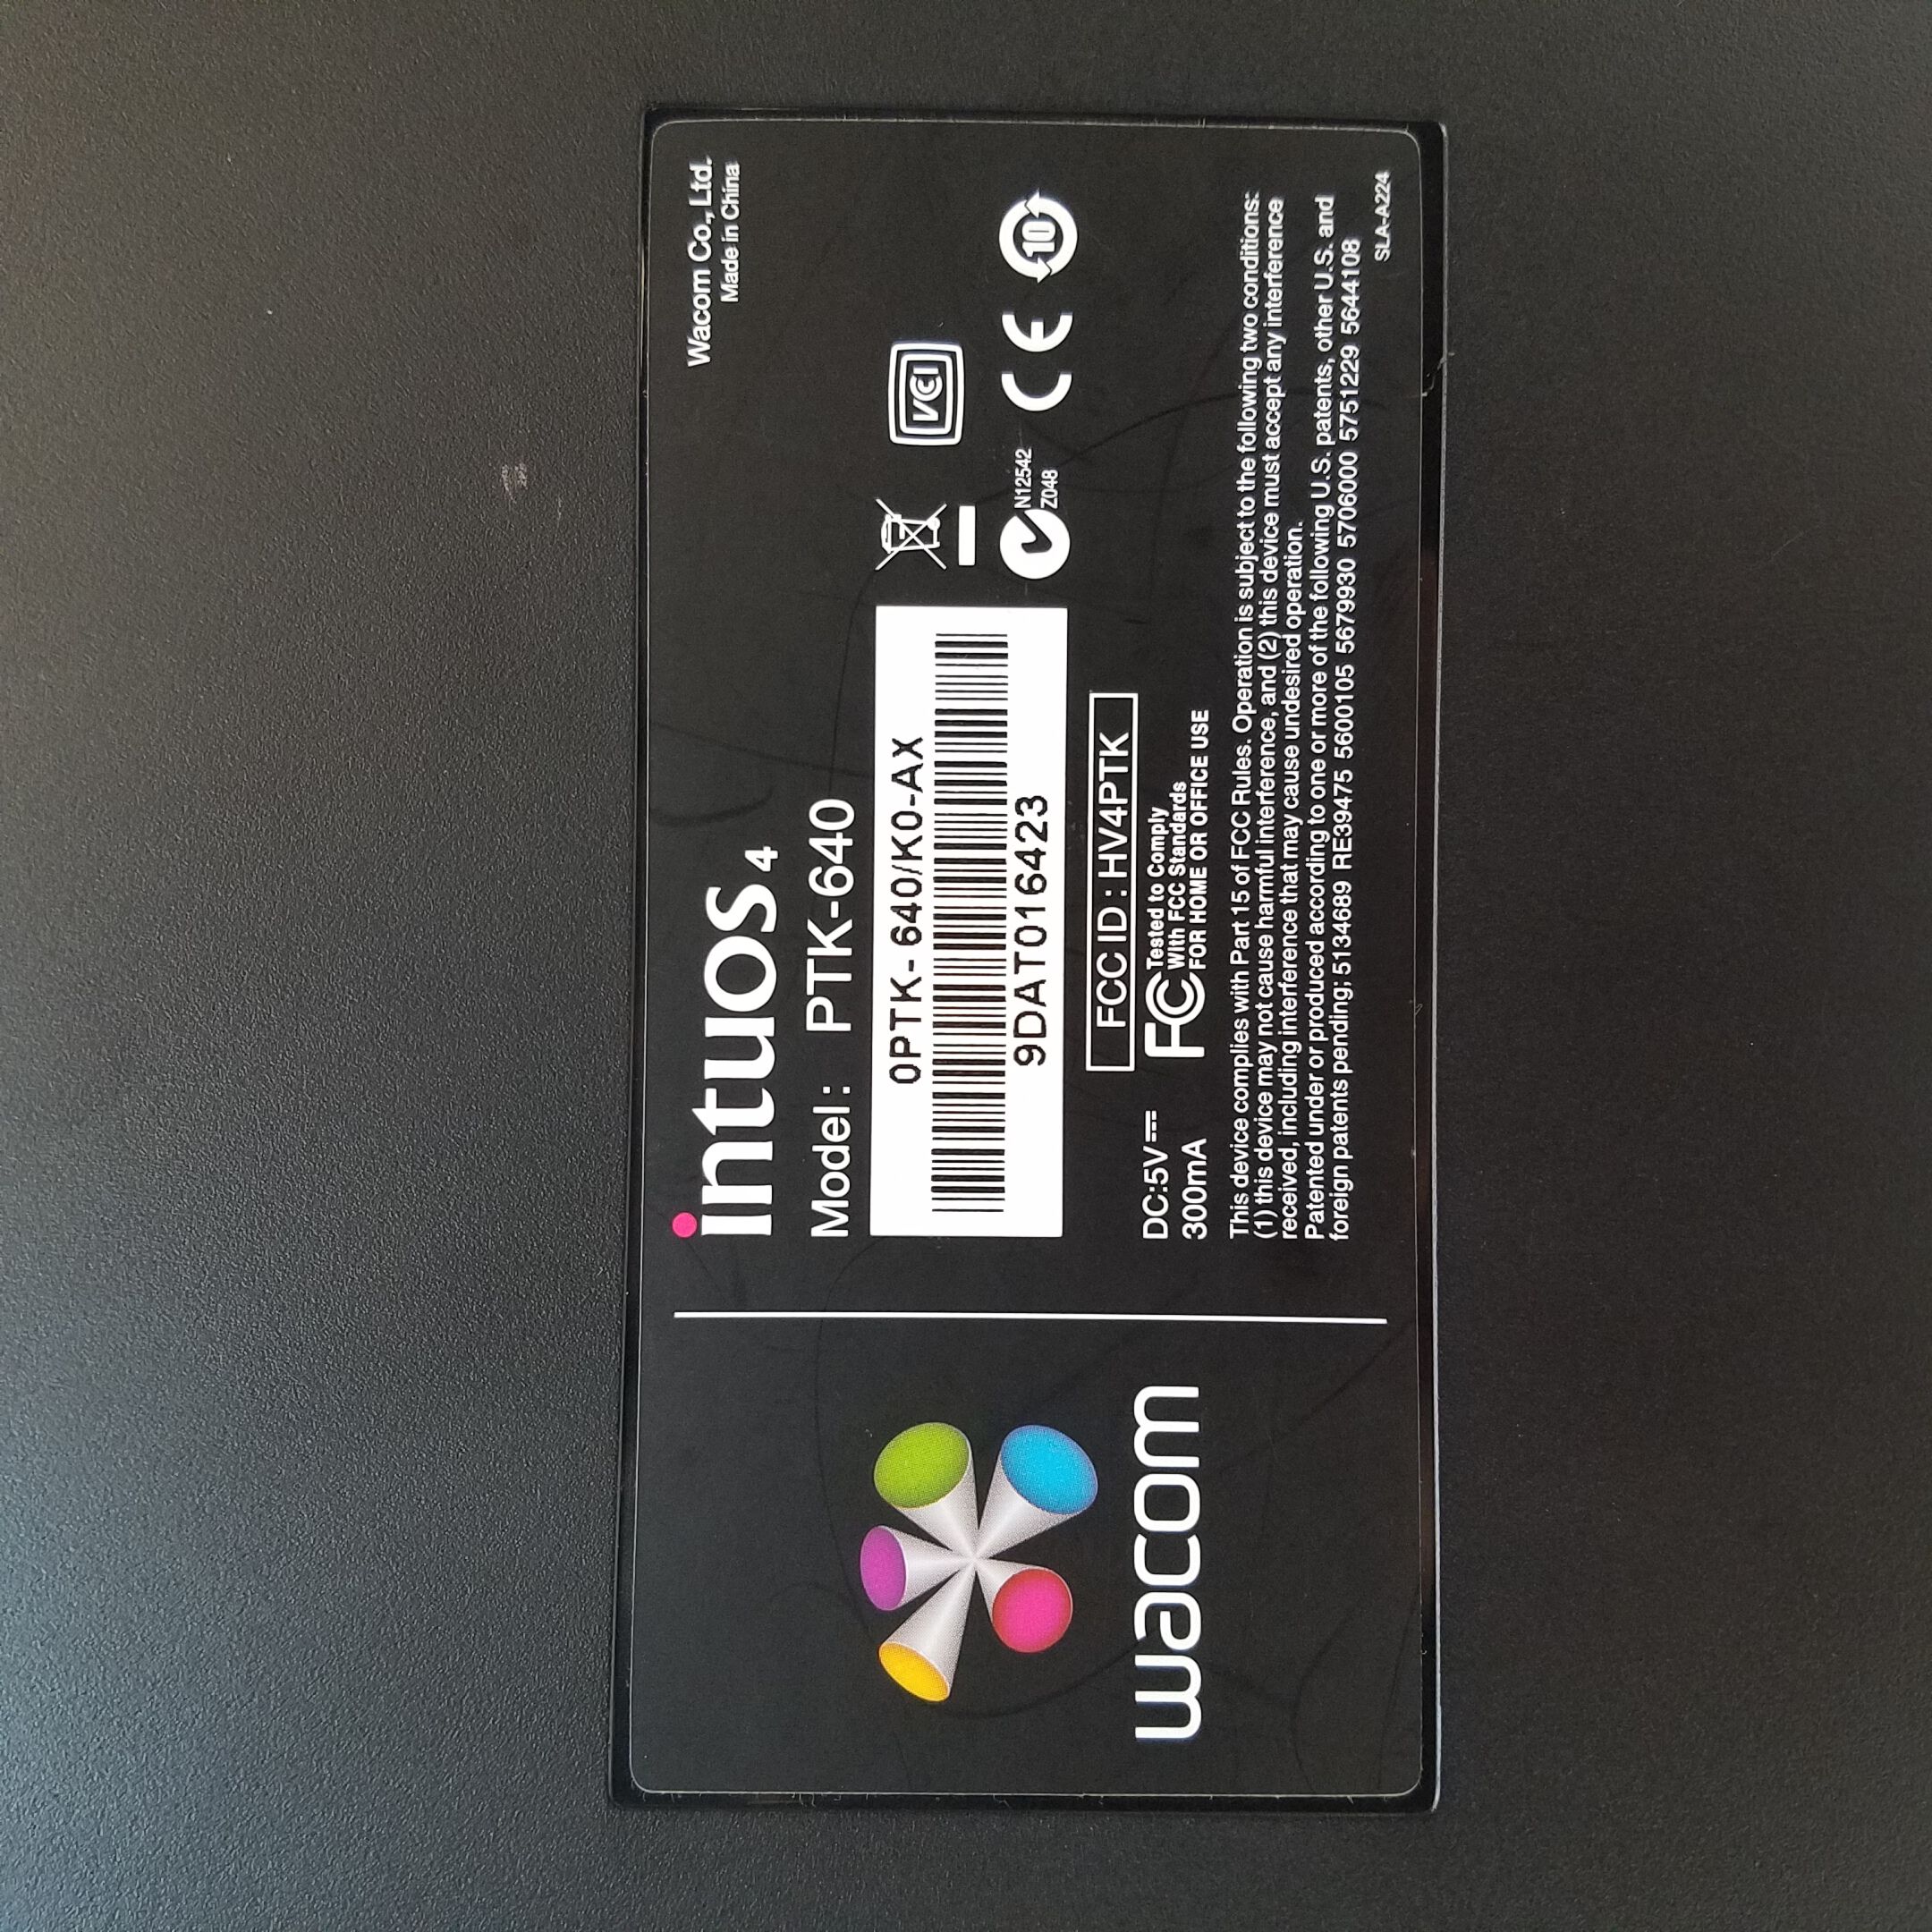 Buy the Wacom Intuos Intuos4 PTK-640 Drawing Tablet | GoodwillFinds